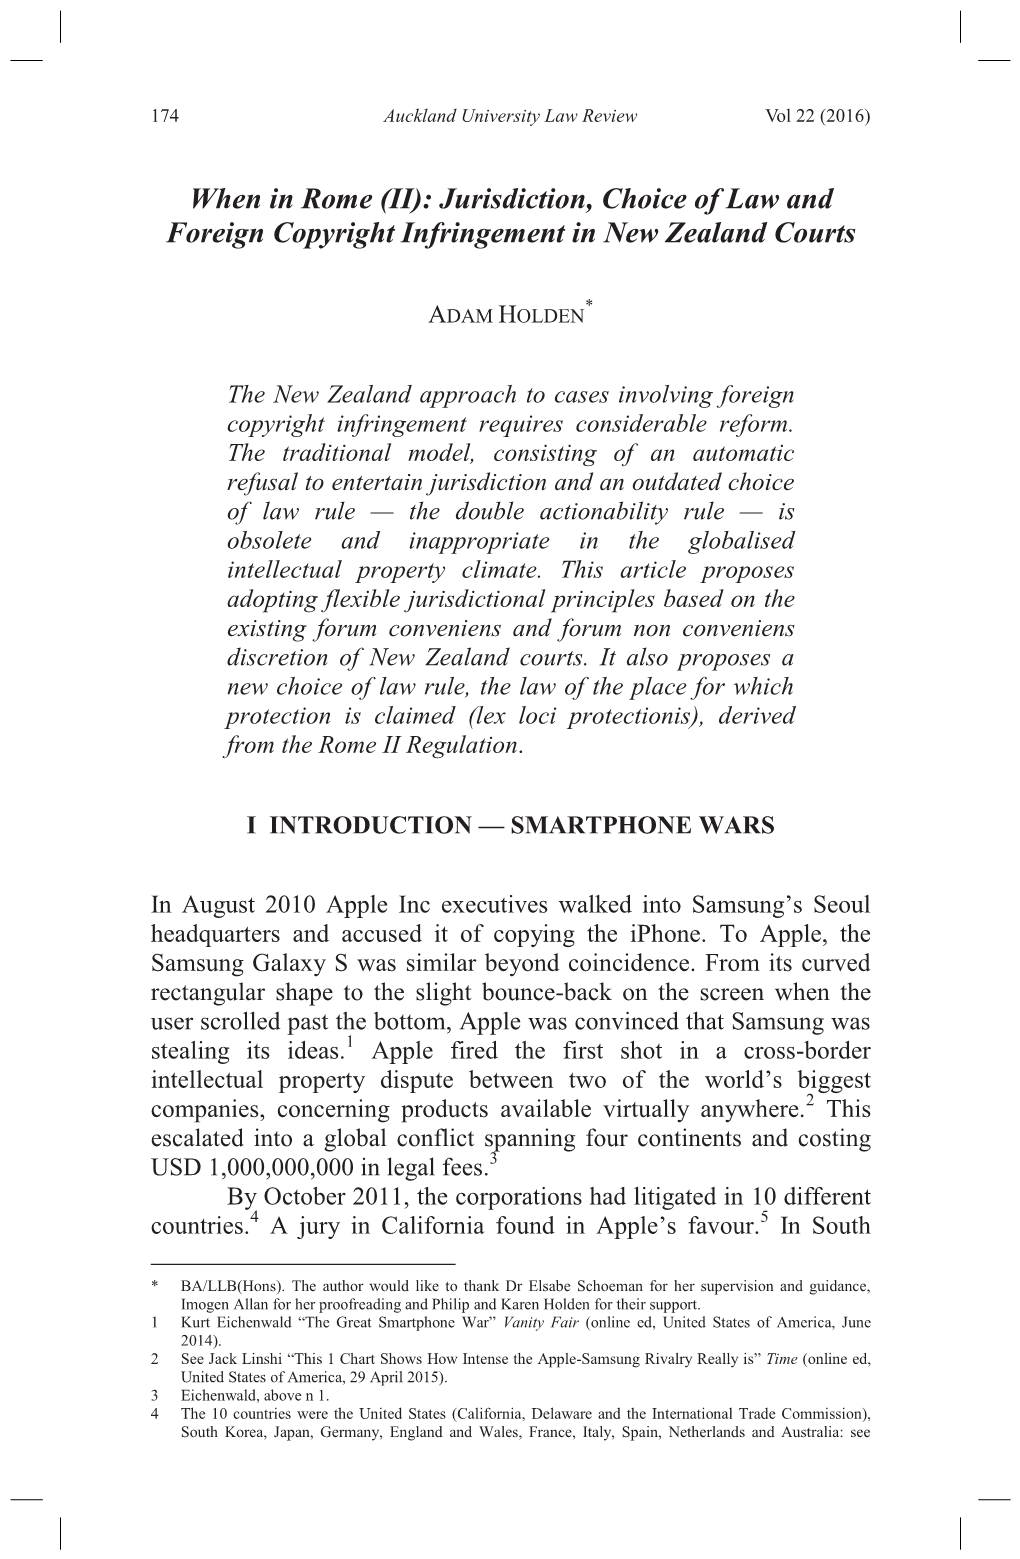 When in Rome (II): Jurisdiction, Choice of Law and Foreign Copyright Infringement in New Zealand Courts